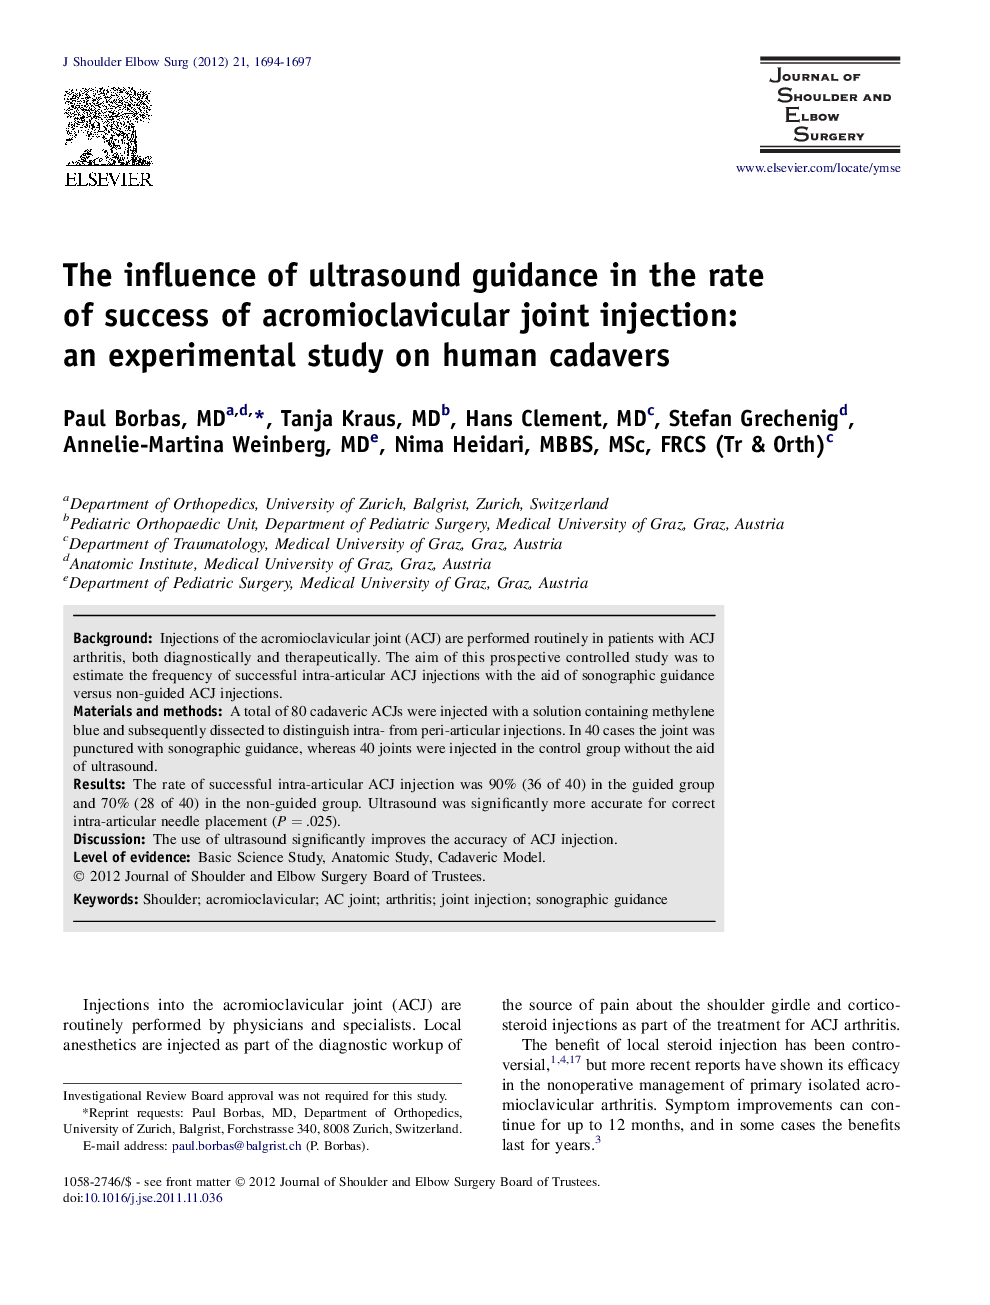 The influence of ultrasound guidance in the rate of success of acromioclavicular joint injection: an experimental study on human cadavers 